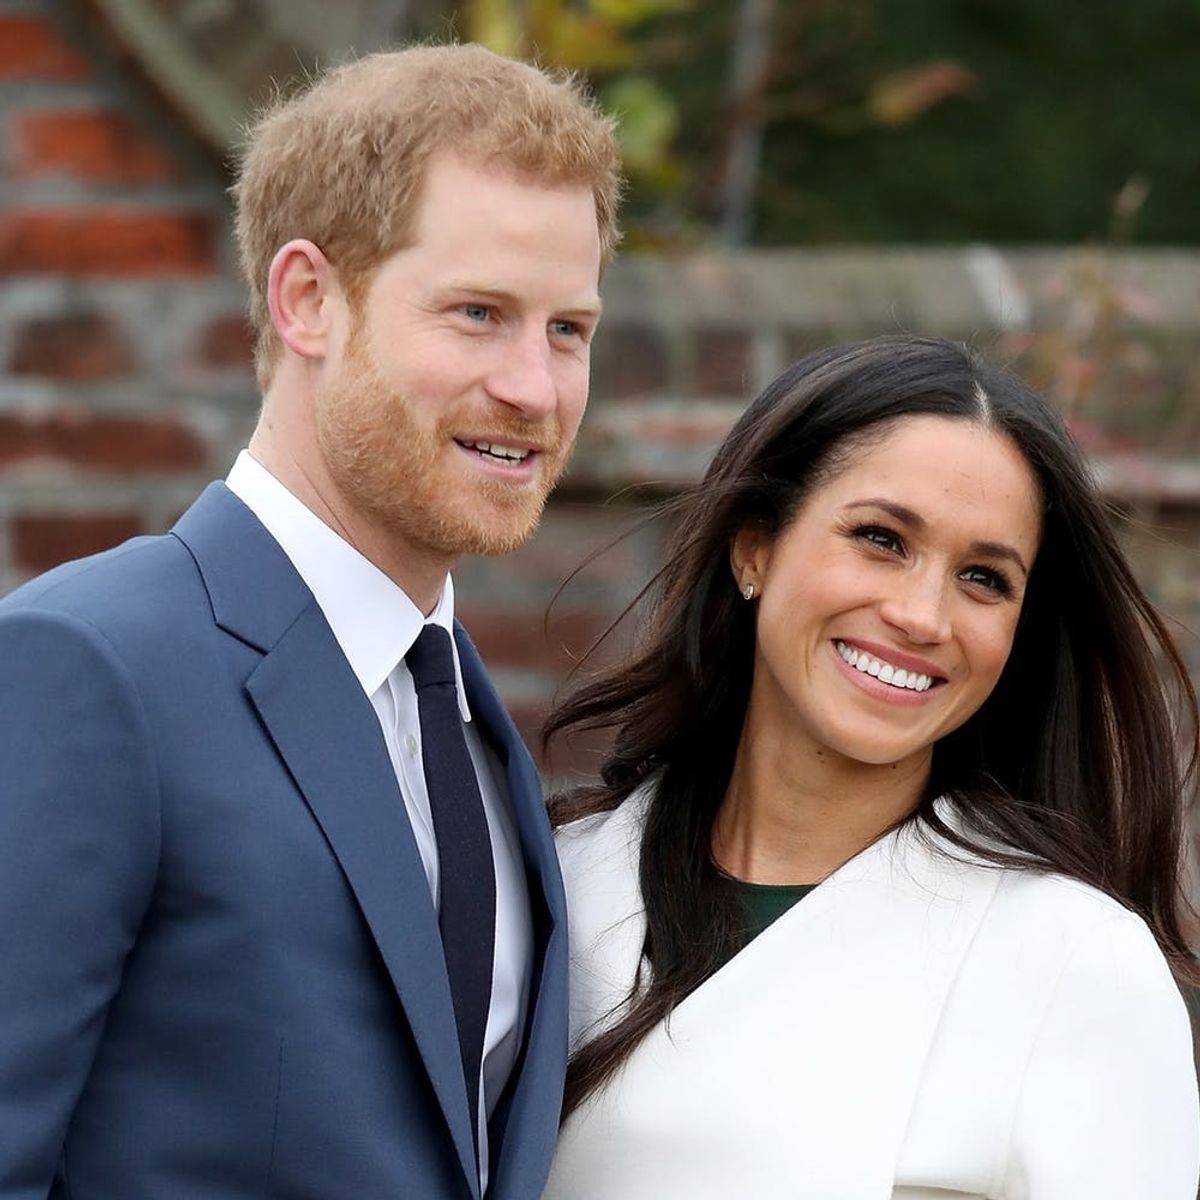 Prince Harry and Meghan Markle Join the Royal Family for Christmas Lunch With the Queen